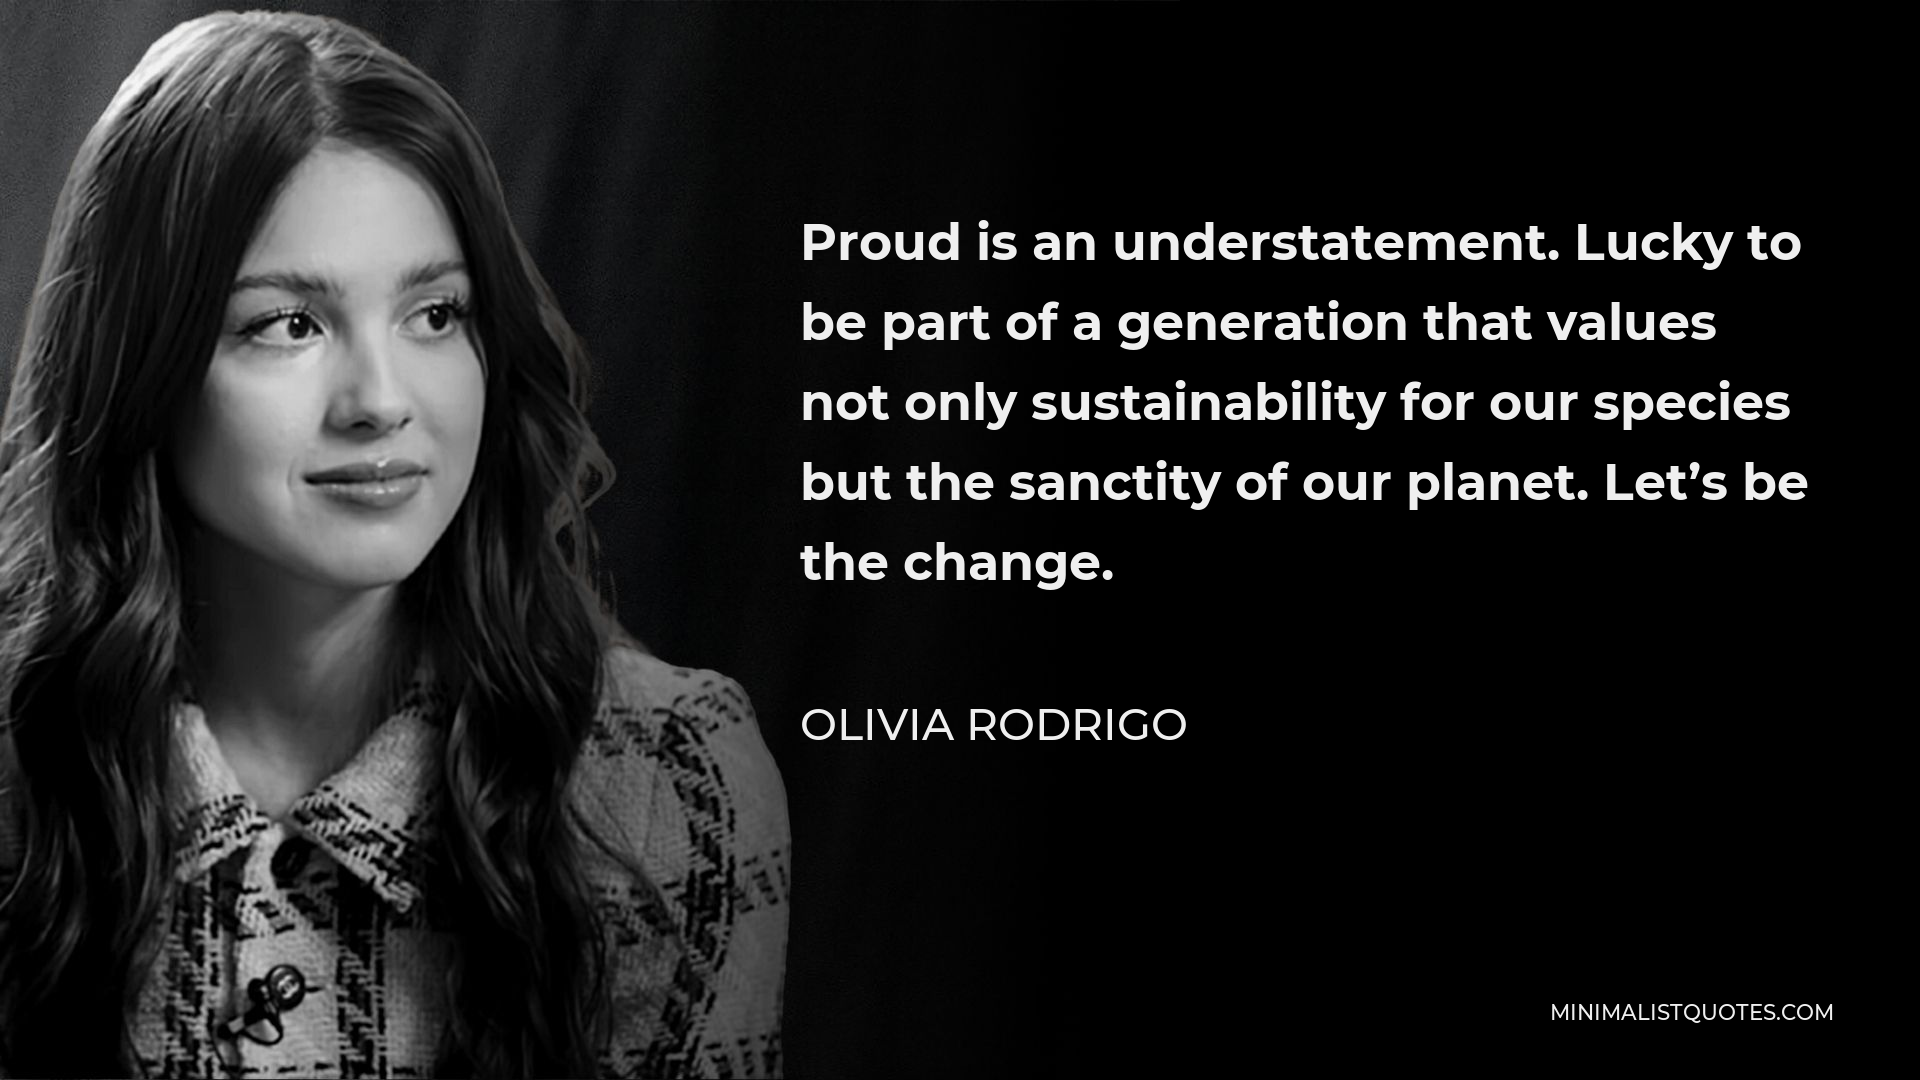 Olivia Rodrigo Quote - Proud is an understatement. Lucky to be part of a generation that values not only sustainability for our species but the sanctity of our planet. Let’s be the change.